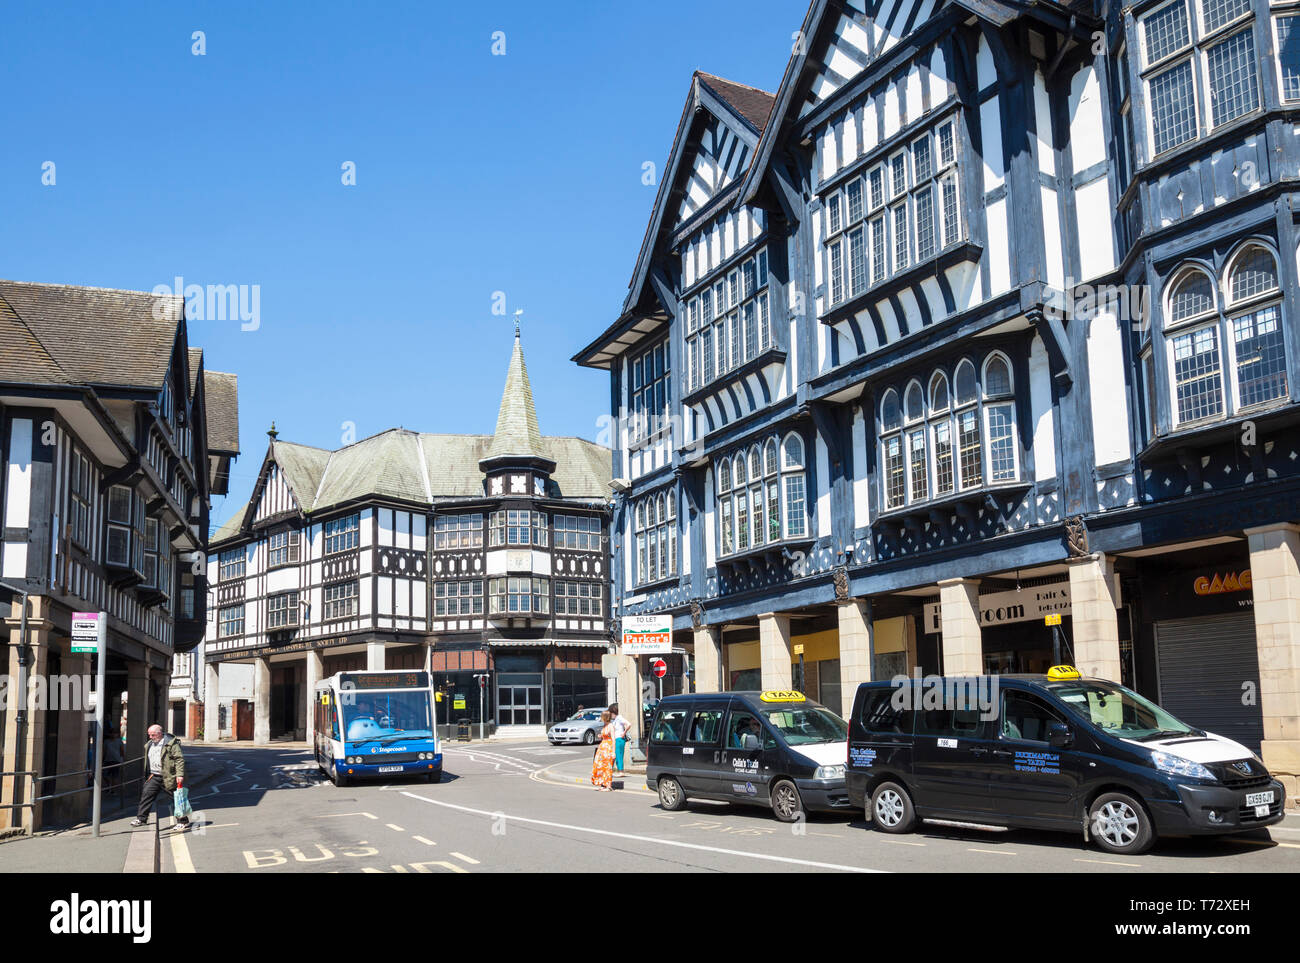 Old historic Half-timbered buildings and Shops on Knifesmithgate Chesterfield town centre Chesterfield Derbyshire England GB UK Europe Stock Photo